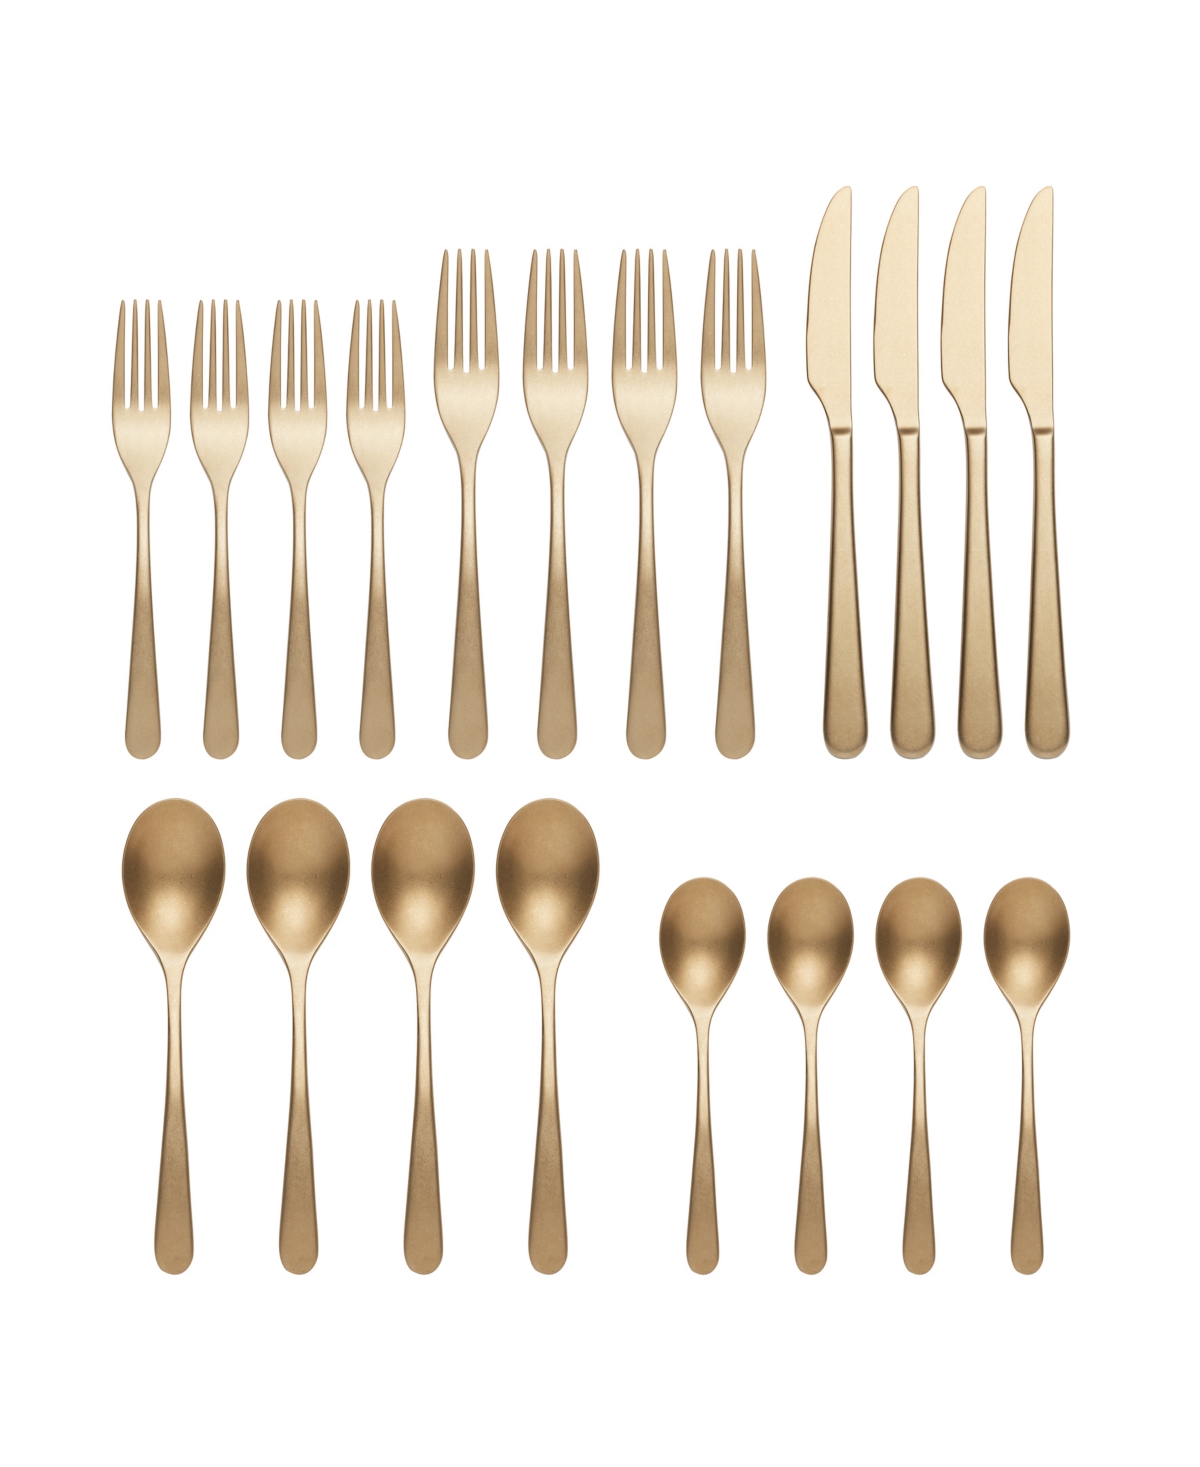 Oneida Kenbrook Champagne Tumbled 20 Piece Everyday Flatware Set, Service For 4 In Metallic